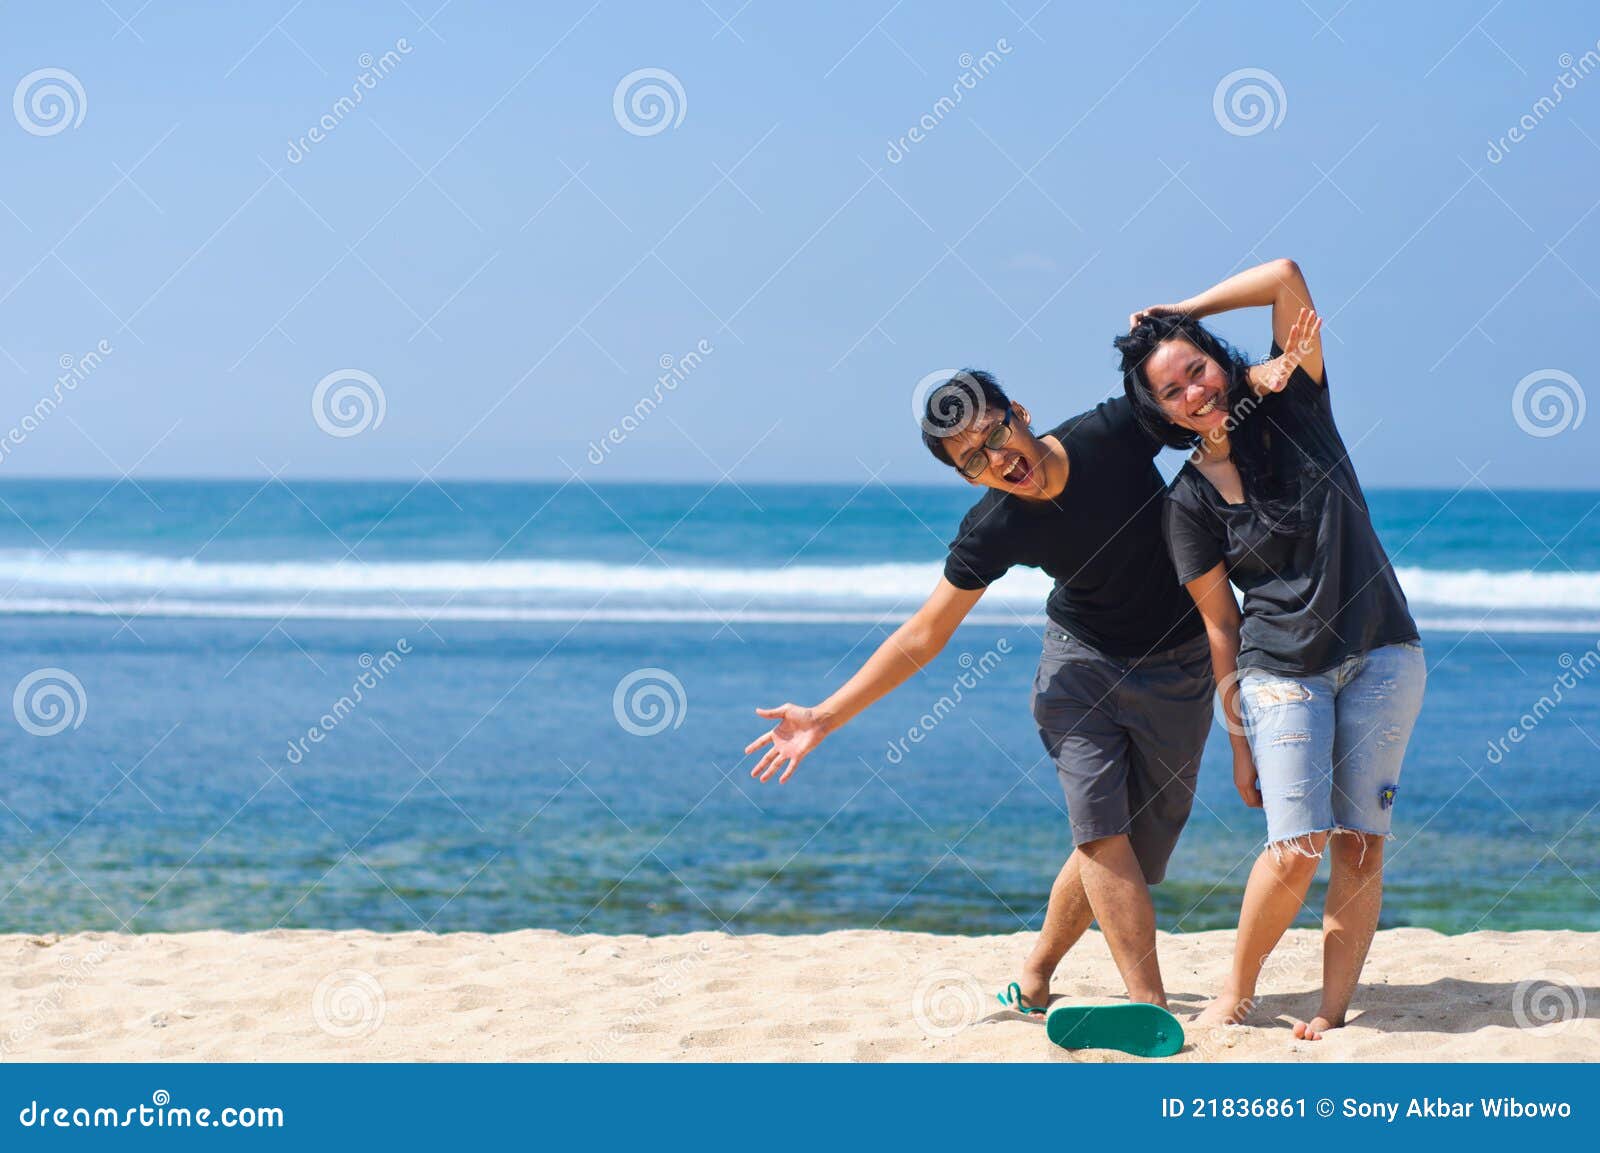 Download this Couple Fun The Beach... picture